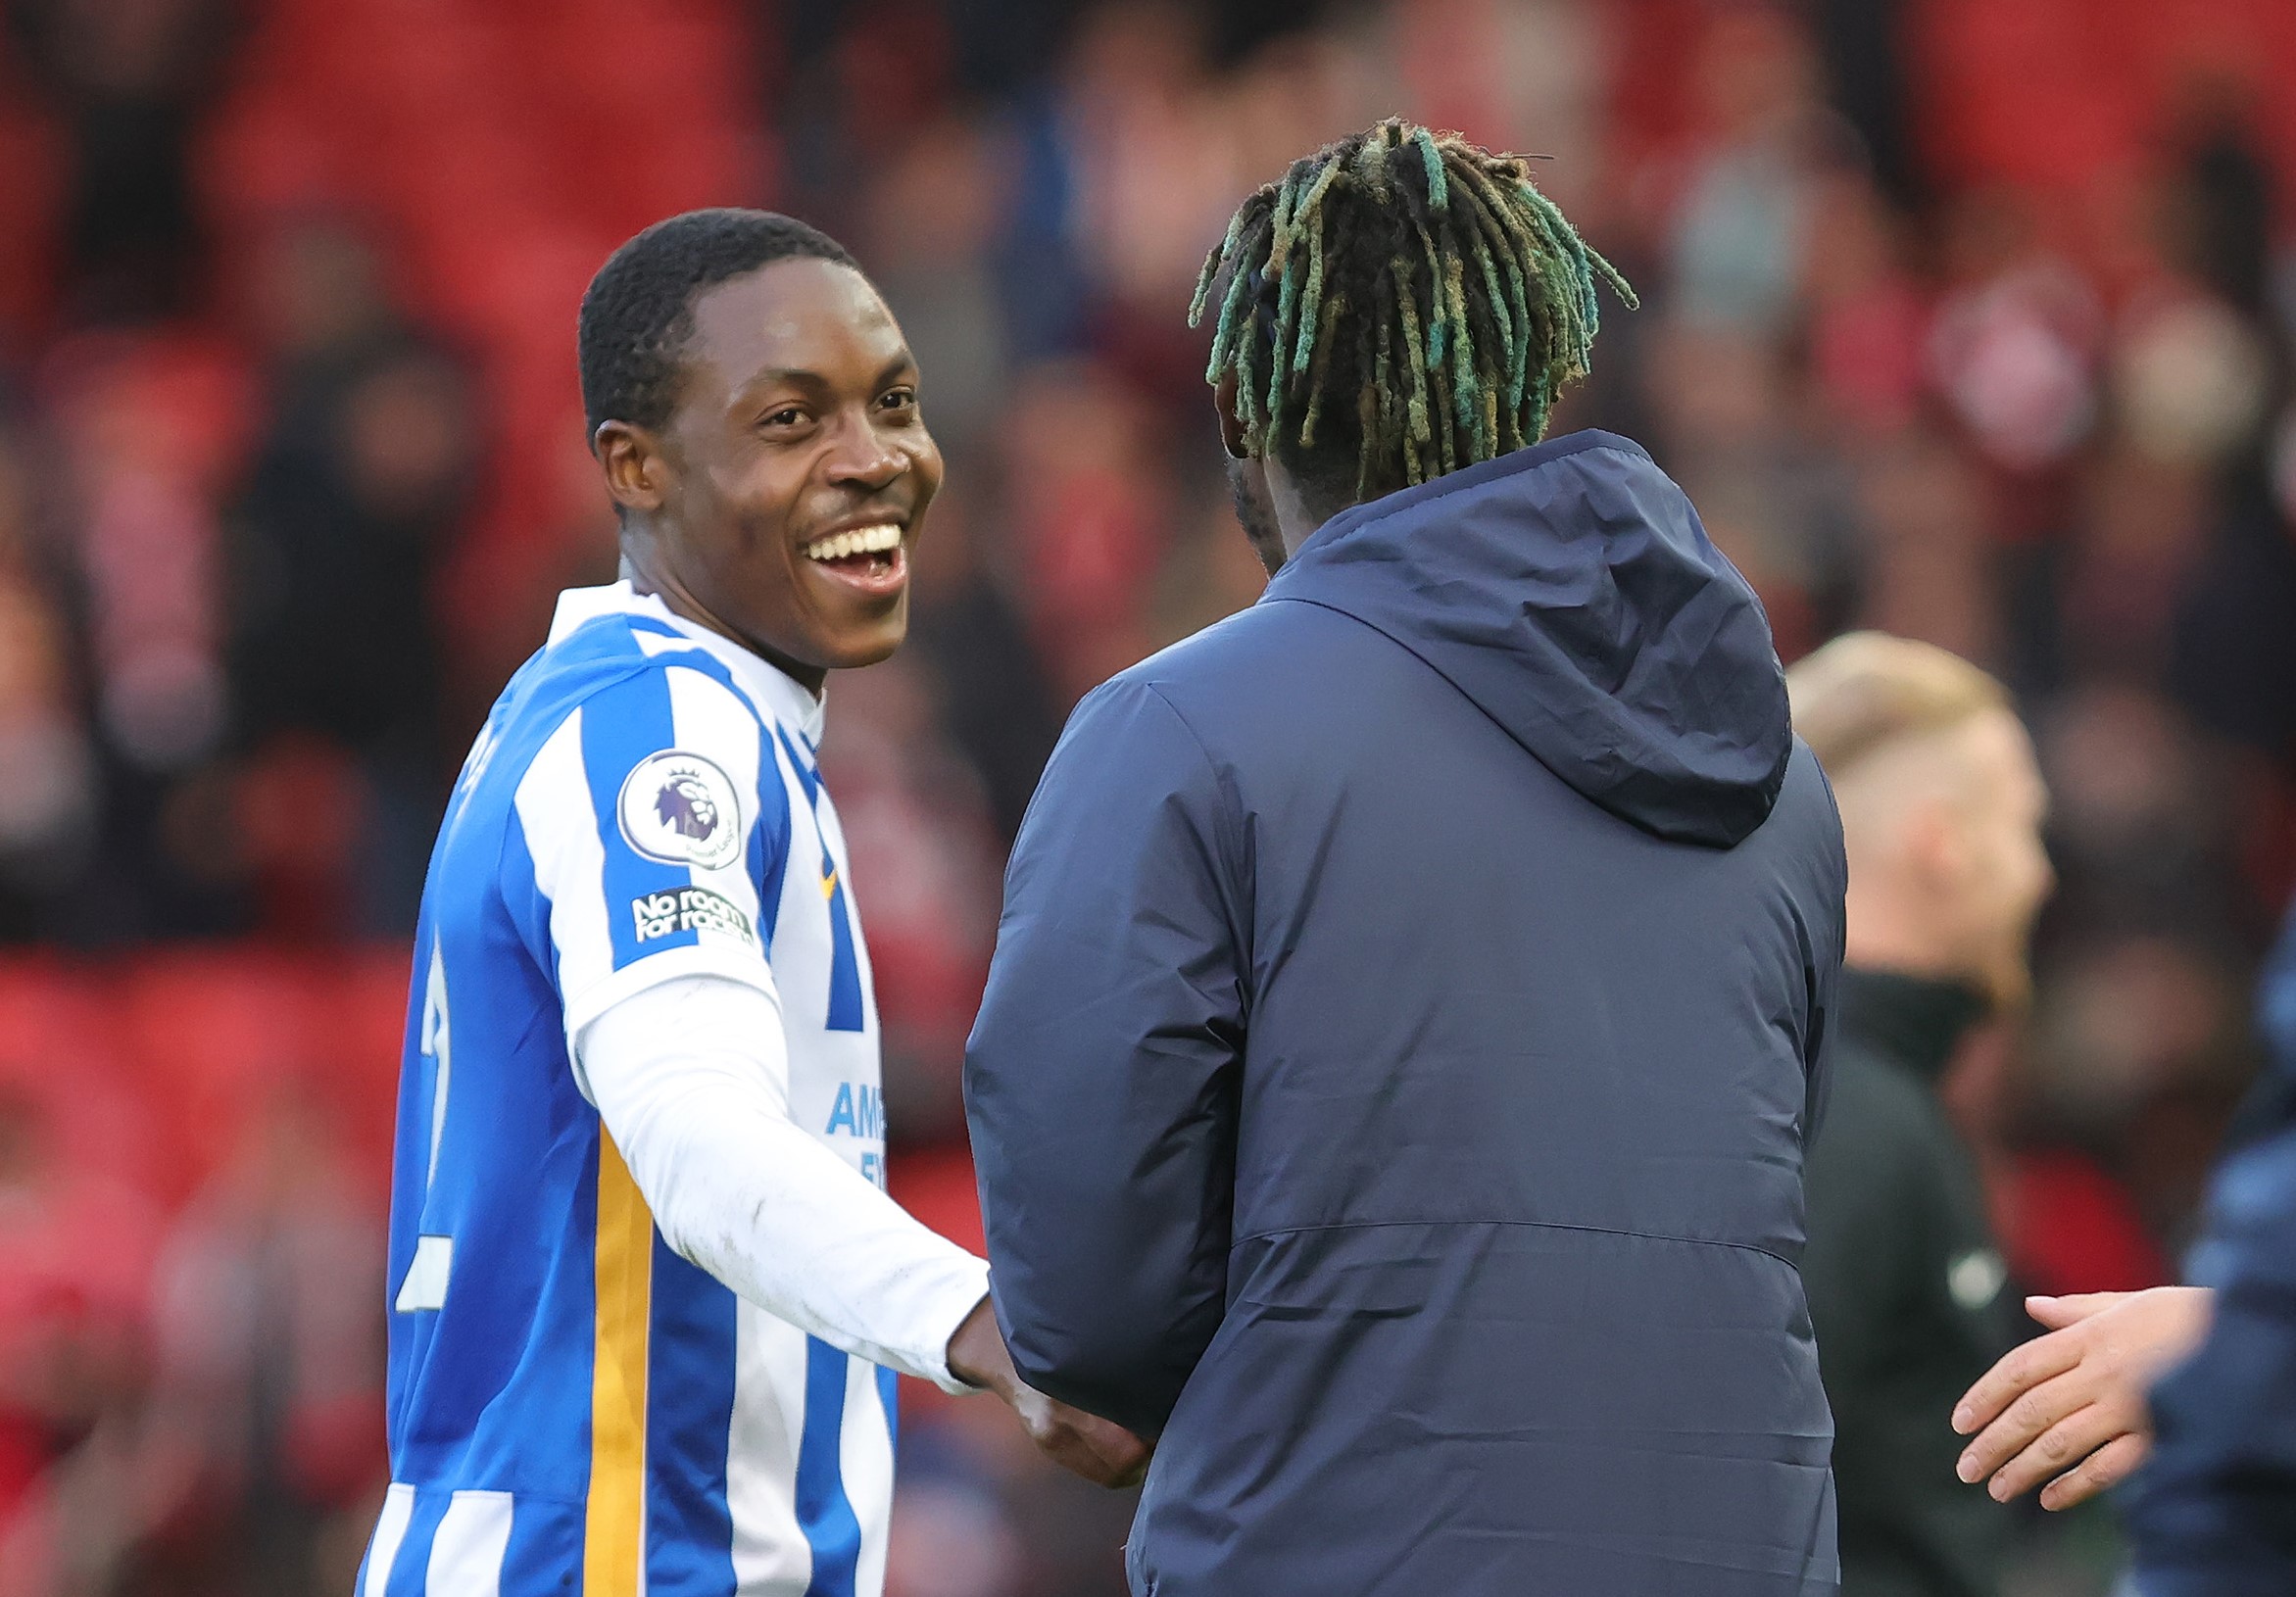 Brighton's Enock Mwepu lost for words after goal at Liverpool